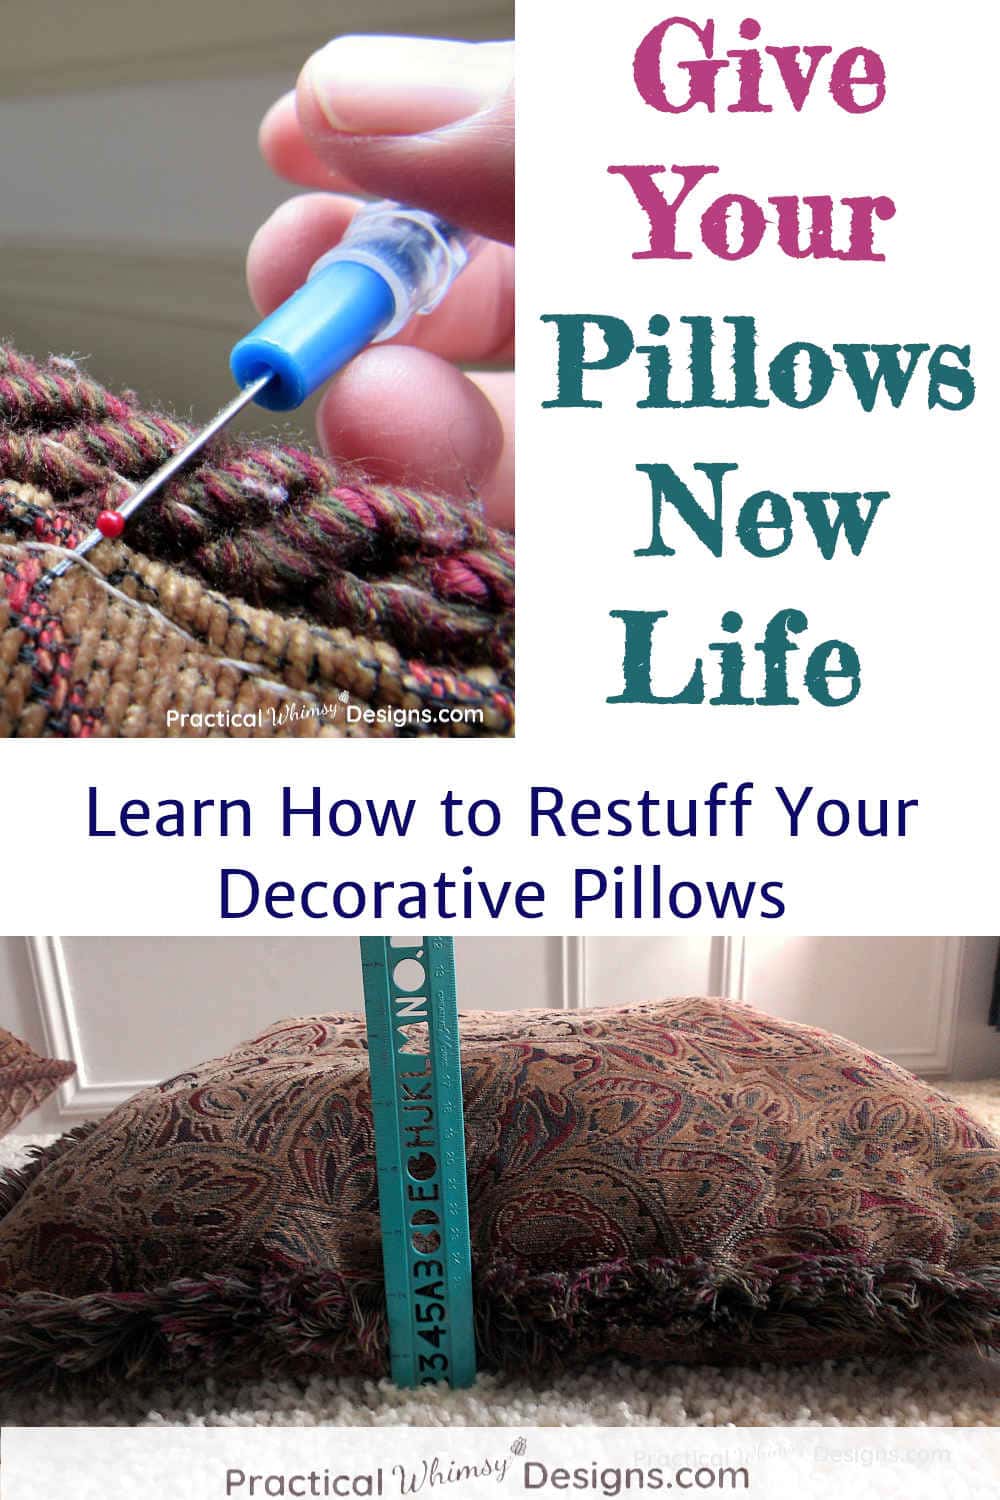 Give your pillows new life text with hands seam ripping pillow